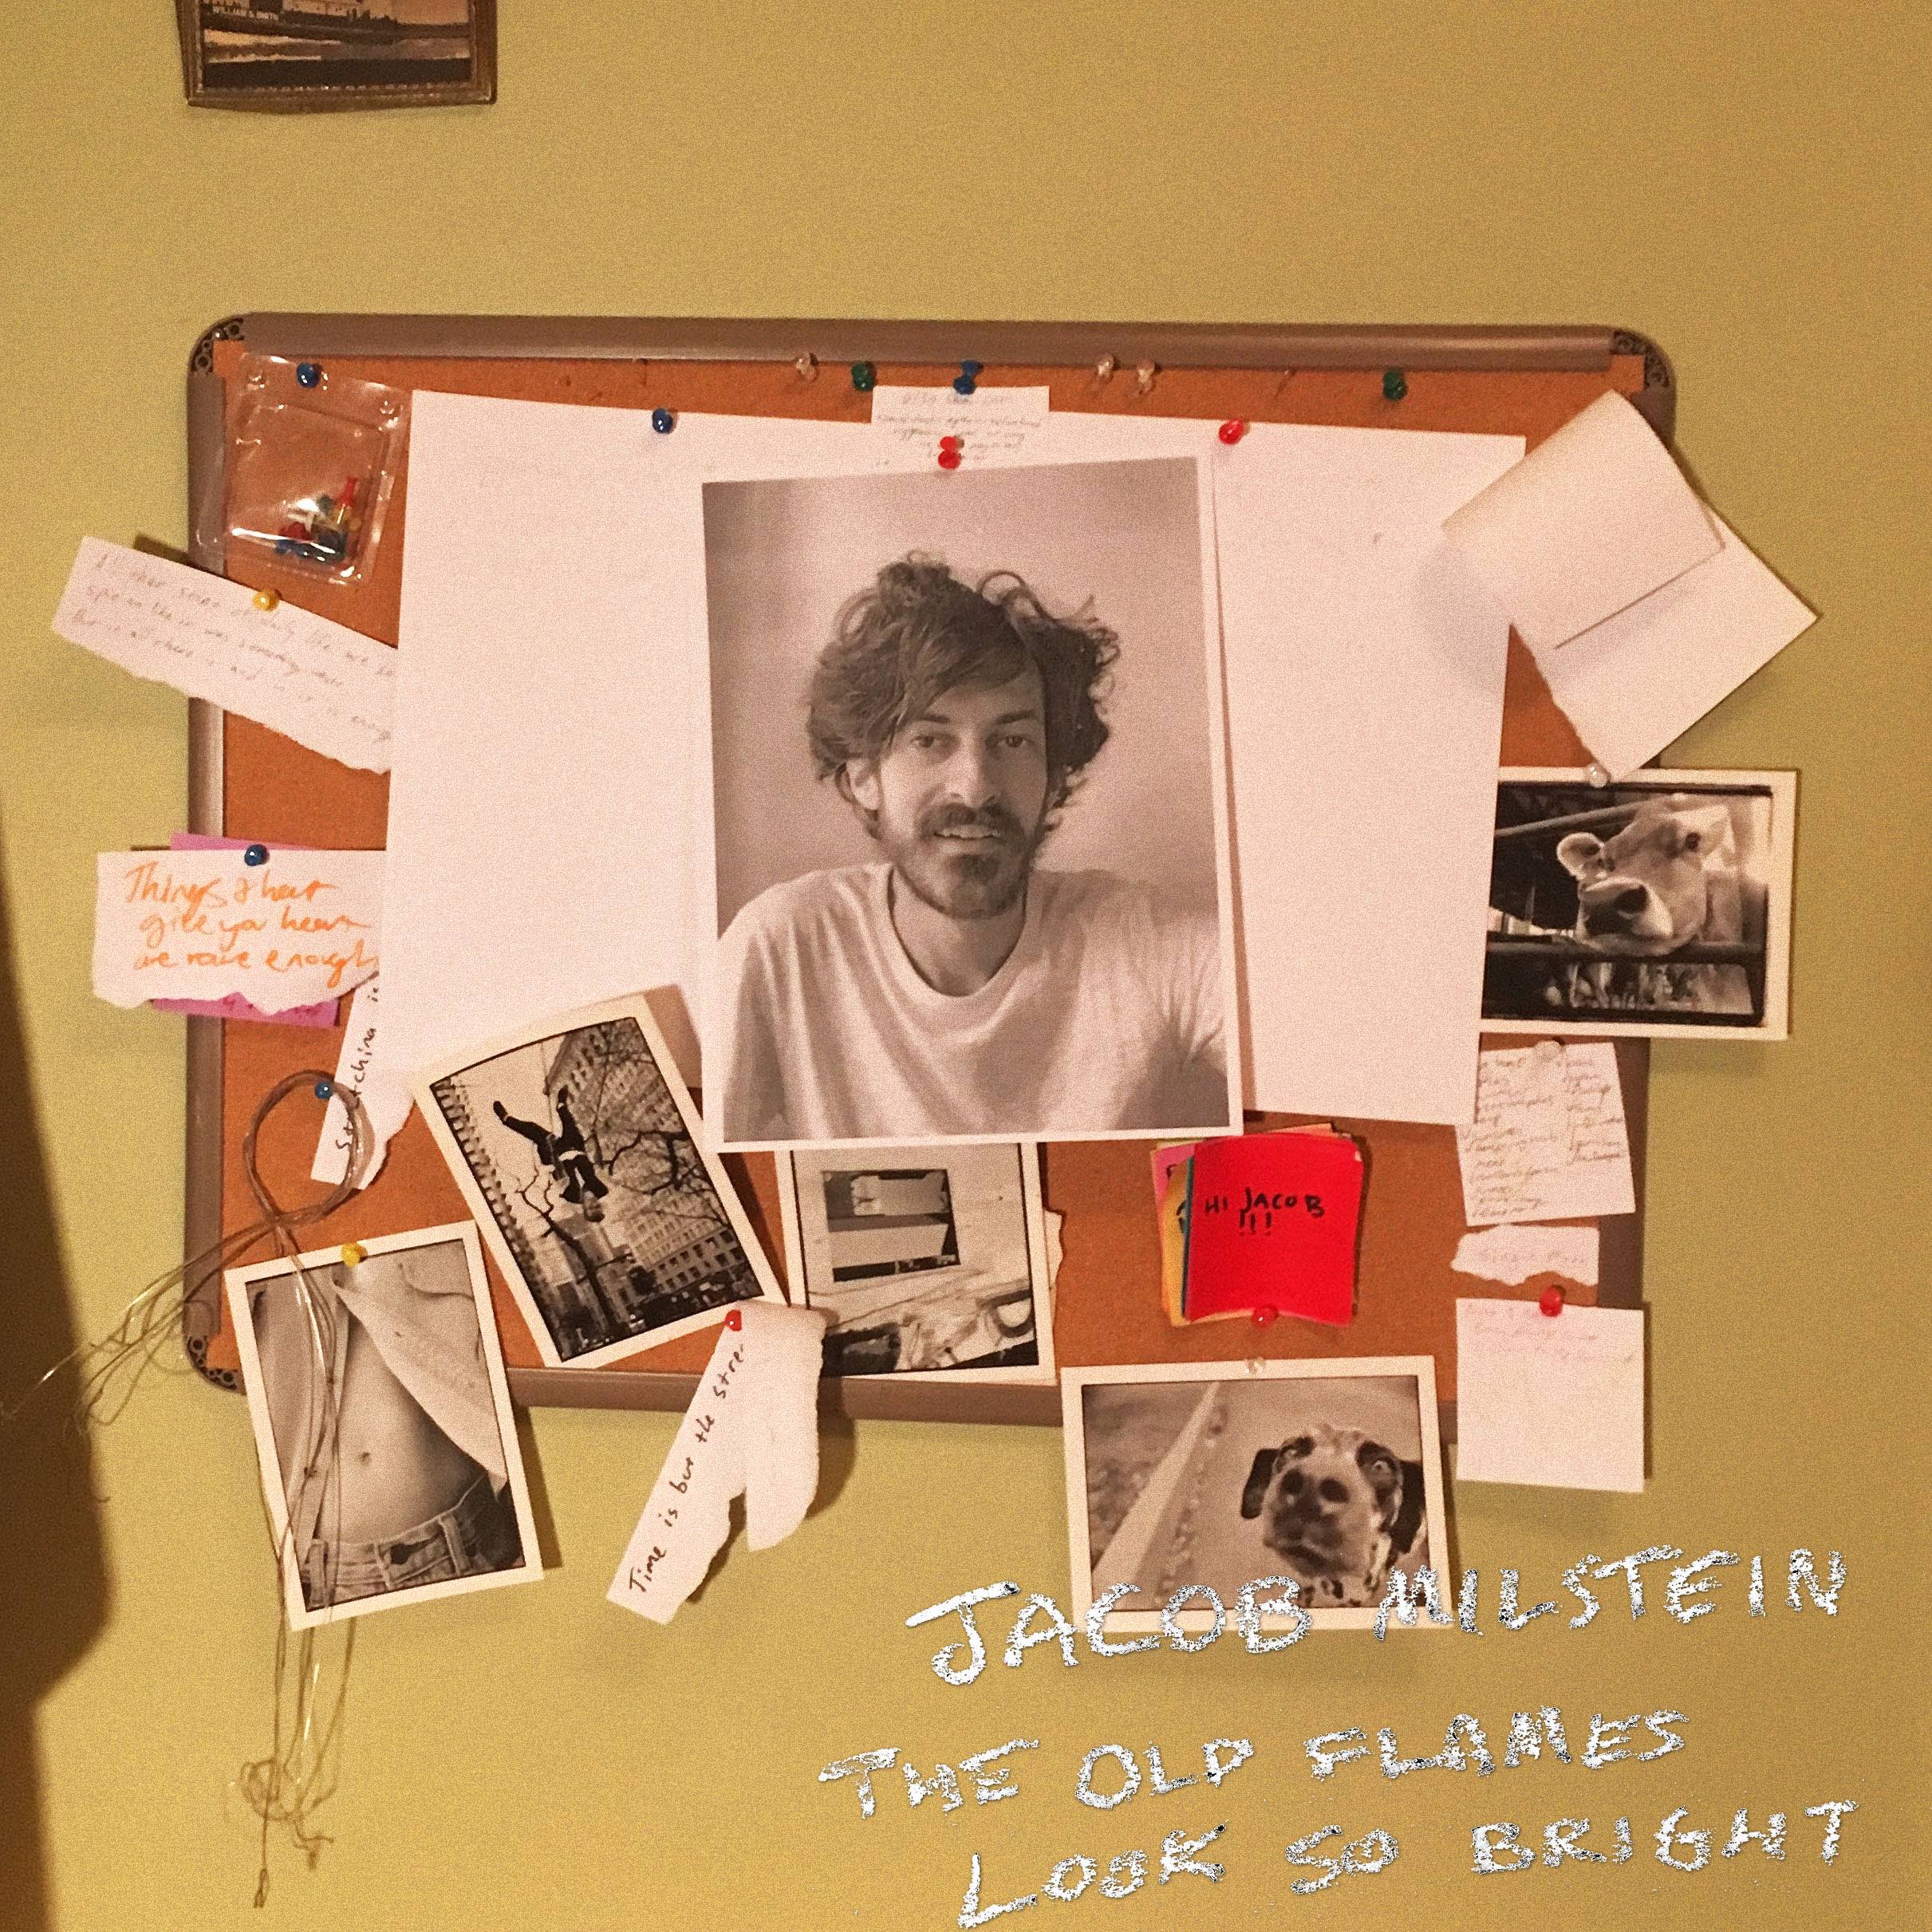 Jacob Milstein - The Old Flames Look So Bright (Single)